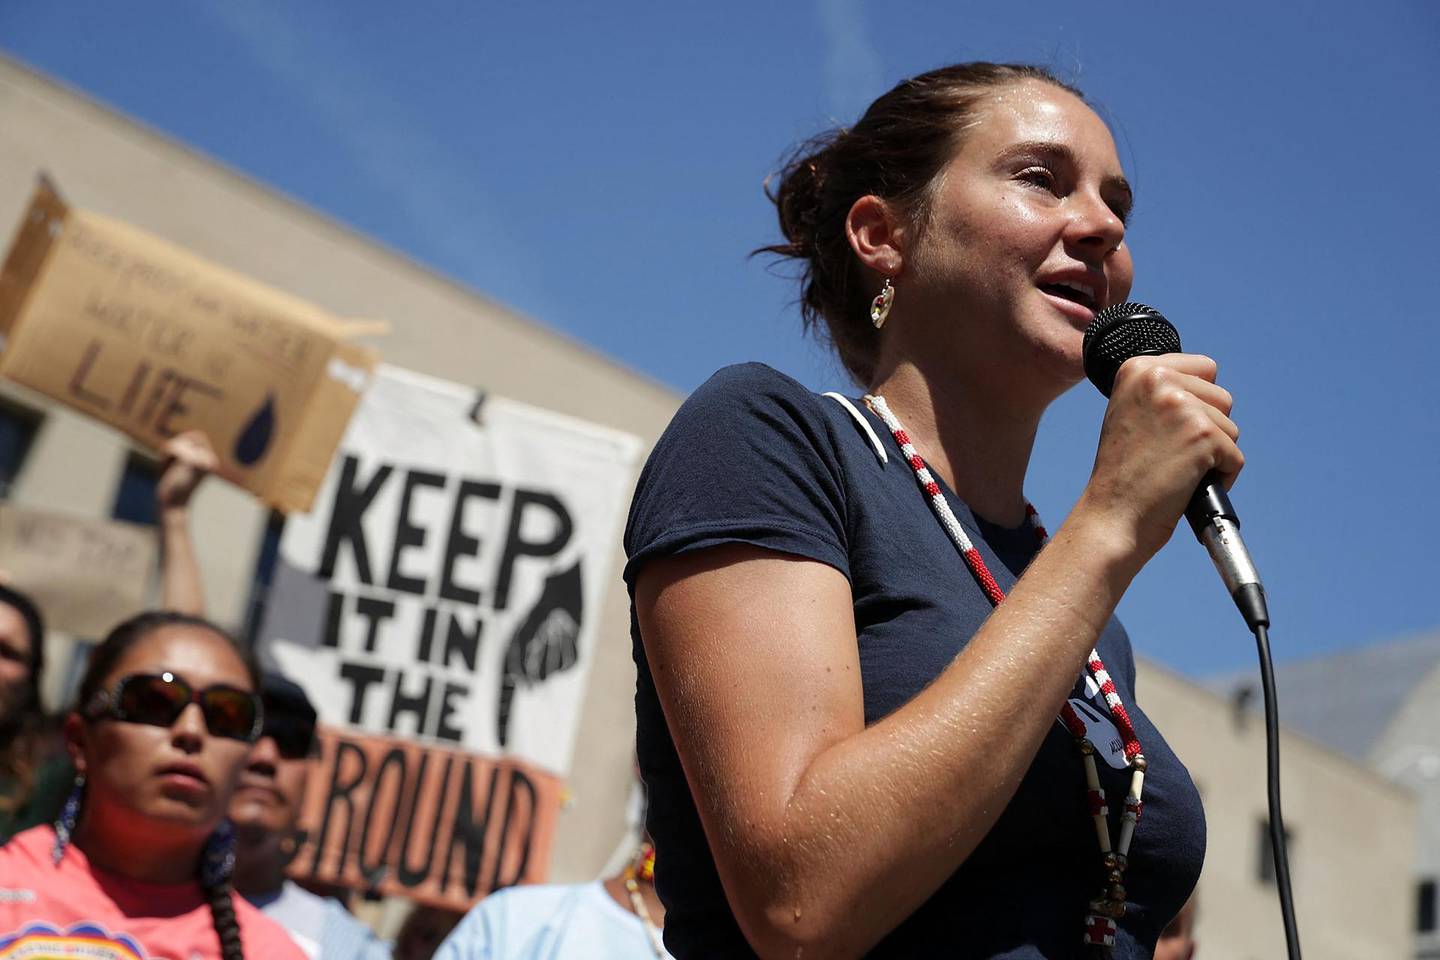 WASHINGTON, DC - AUGUST 24: Actress Shailene Woodley speaks during a rally on Dakota Access Pipeline August 24, 2016 outside U.S. District Court in Washington, DC. Activists held a rally in support of a lawsuit against the Army Corps of Engineers "to protect water and land from the Dakota Access Pipeline," and to call for "a full halt to all construction activities and repeal of all pipeline permits until formal tribal consultation and environmental review are conducted."   Alex Wong/Getty Images/AFP (Photo by ALEX WONG / GETTY IMAGES NORTH AMERICA / Getty Images via AFP)